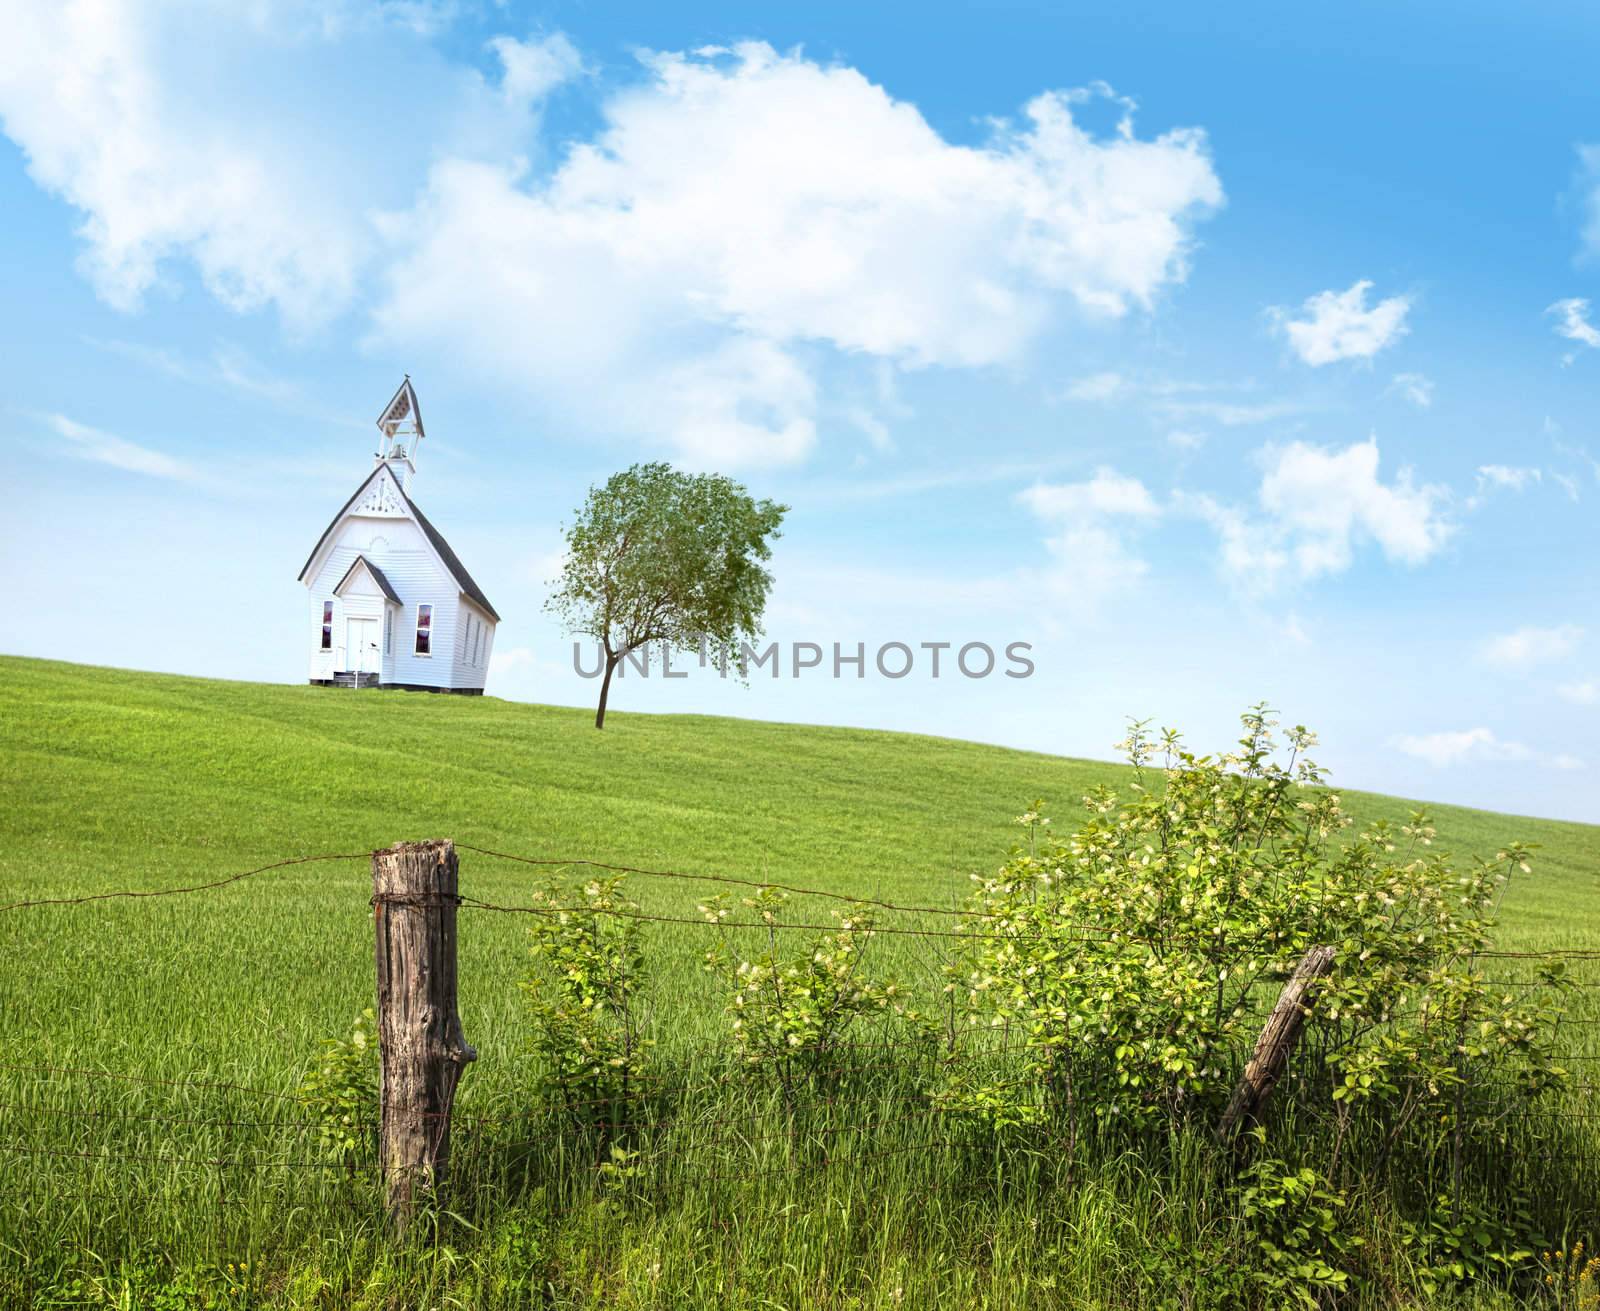 Old country school house  on a hill against a blue sky